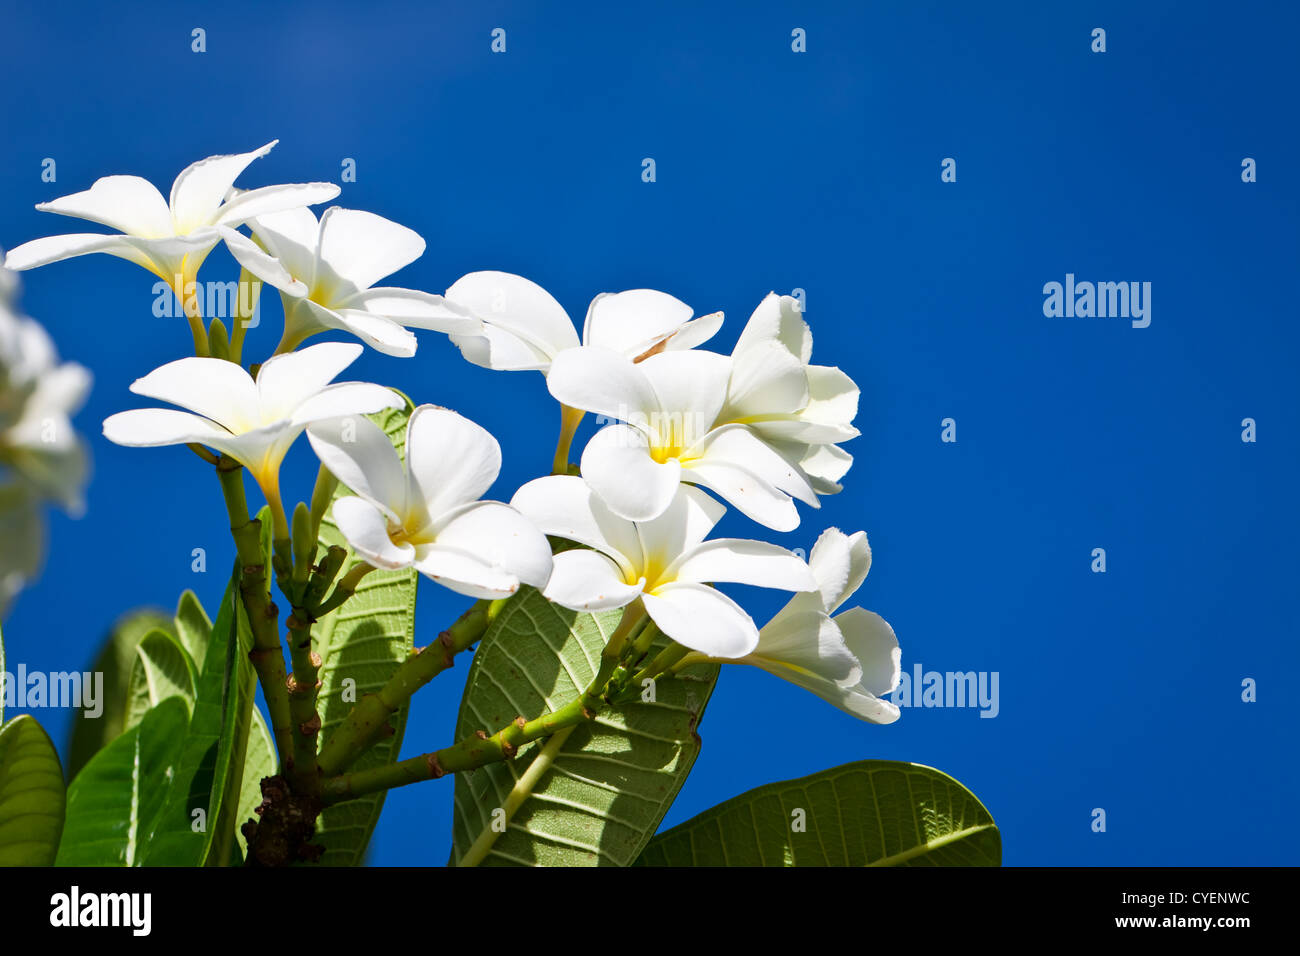 A branch with beautiful white Frangipani flowers in front of a blue sky. Stock Photo